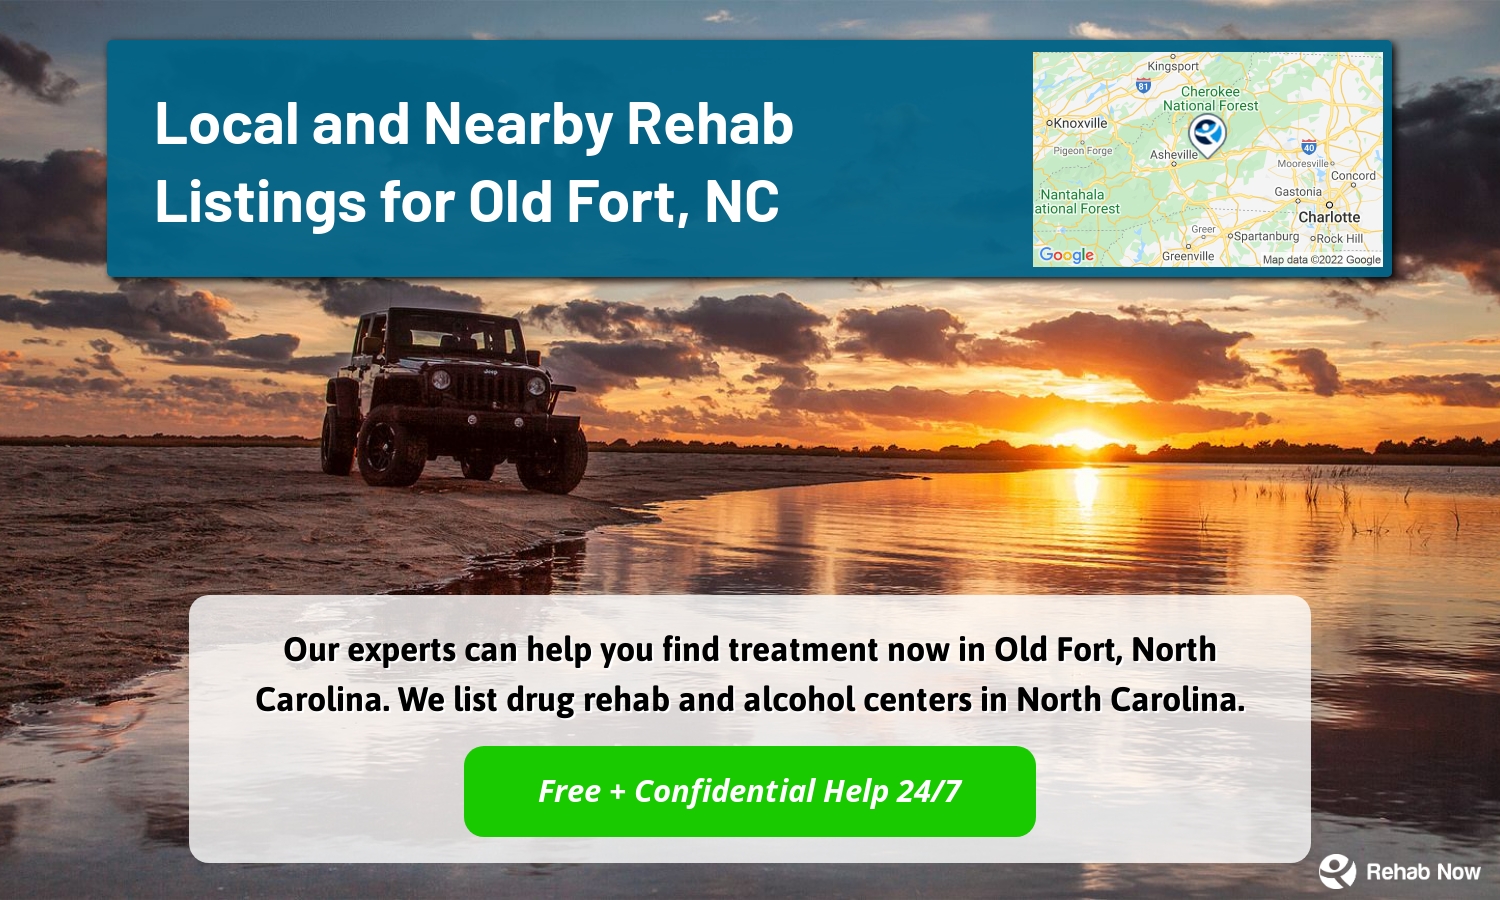 Our experts can help you find treatment now in Old Fort, North Carolina. We list drug rehab and alcohol centers in North Carolina.